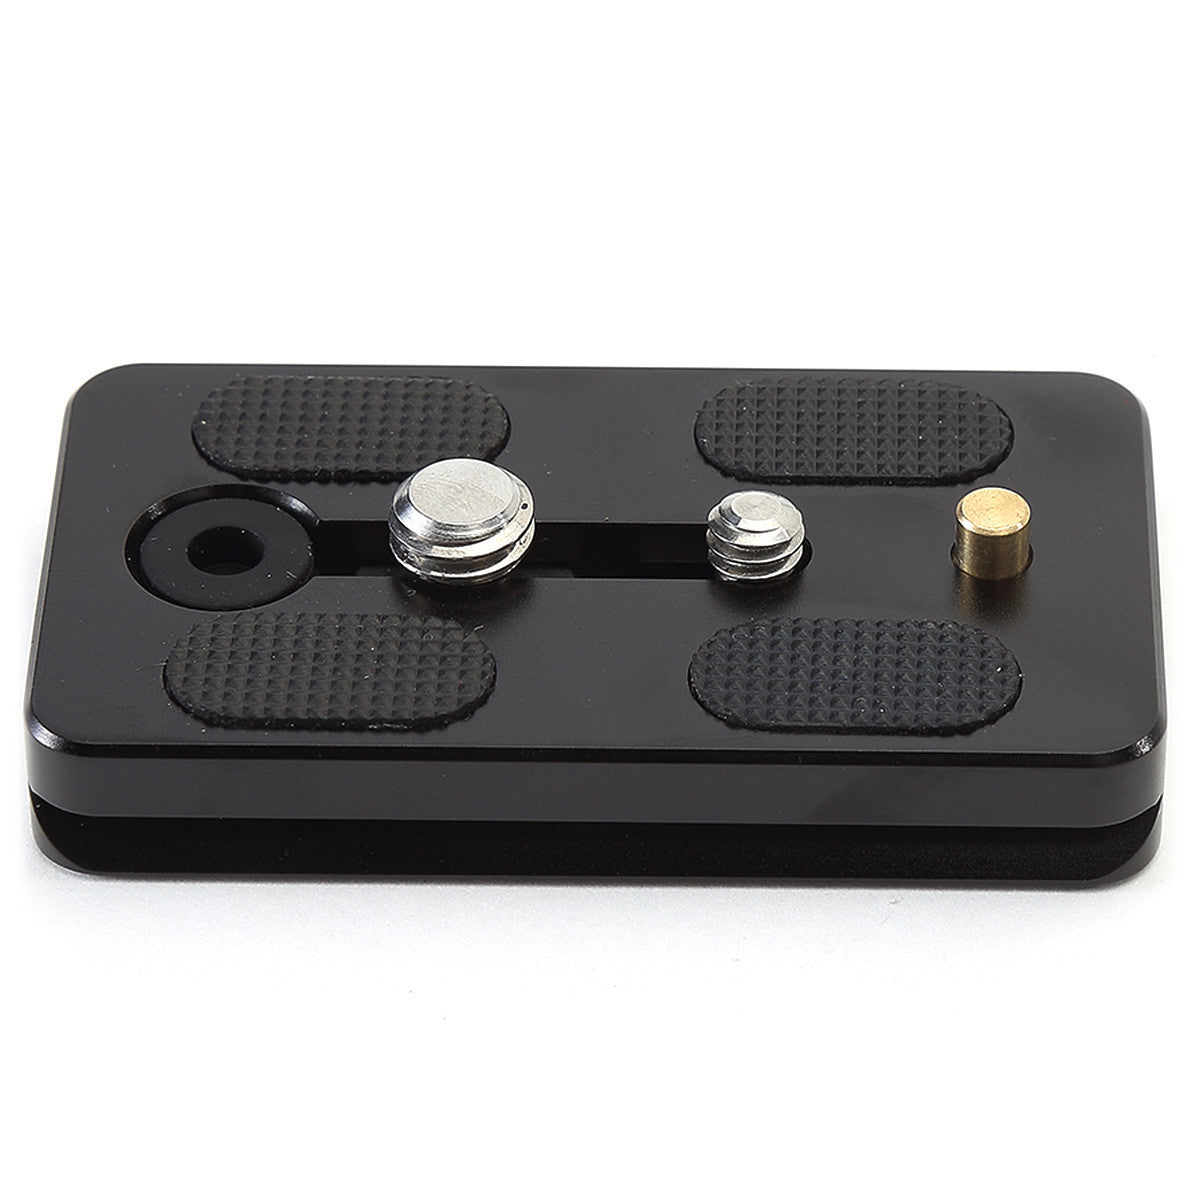 Sirui TY-70A Quick Release Plate in Sirui TY-70A Quick Release Plate - goHUNT Shop by GOHUNT | Sirui - GOHUNT Shop